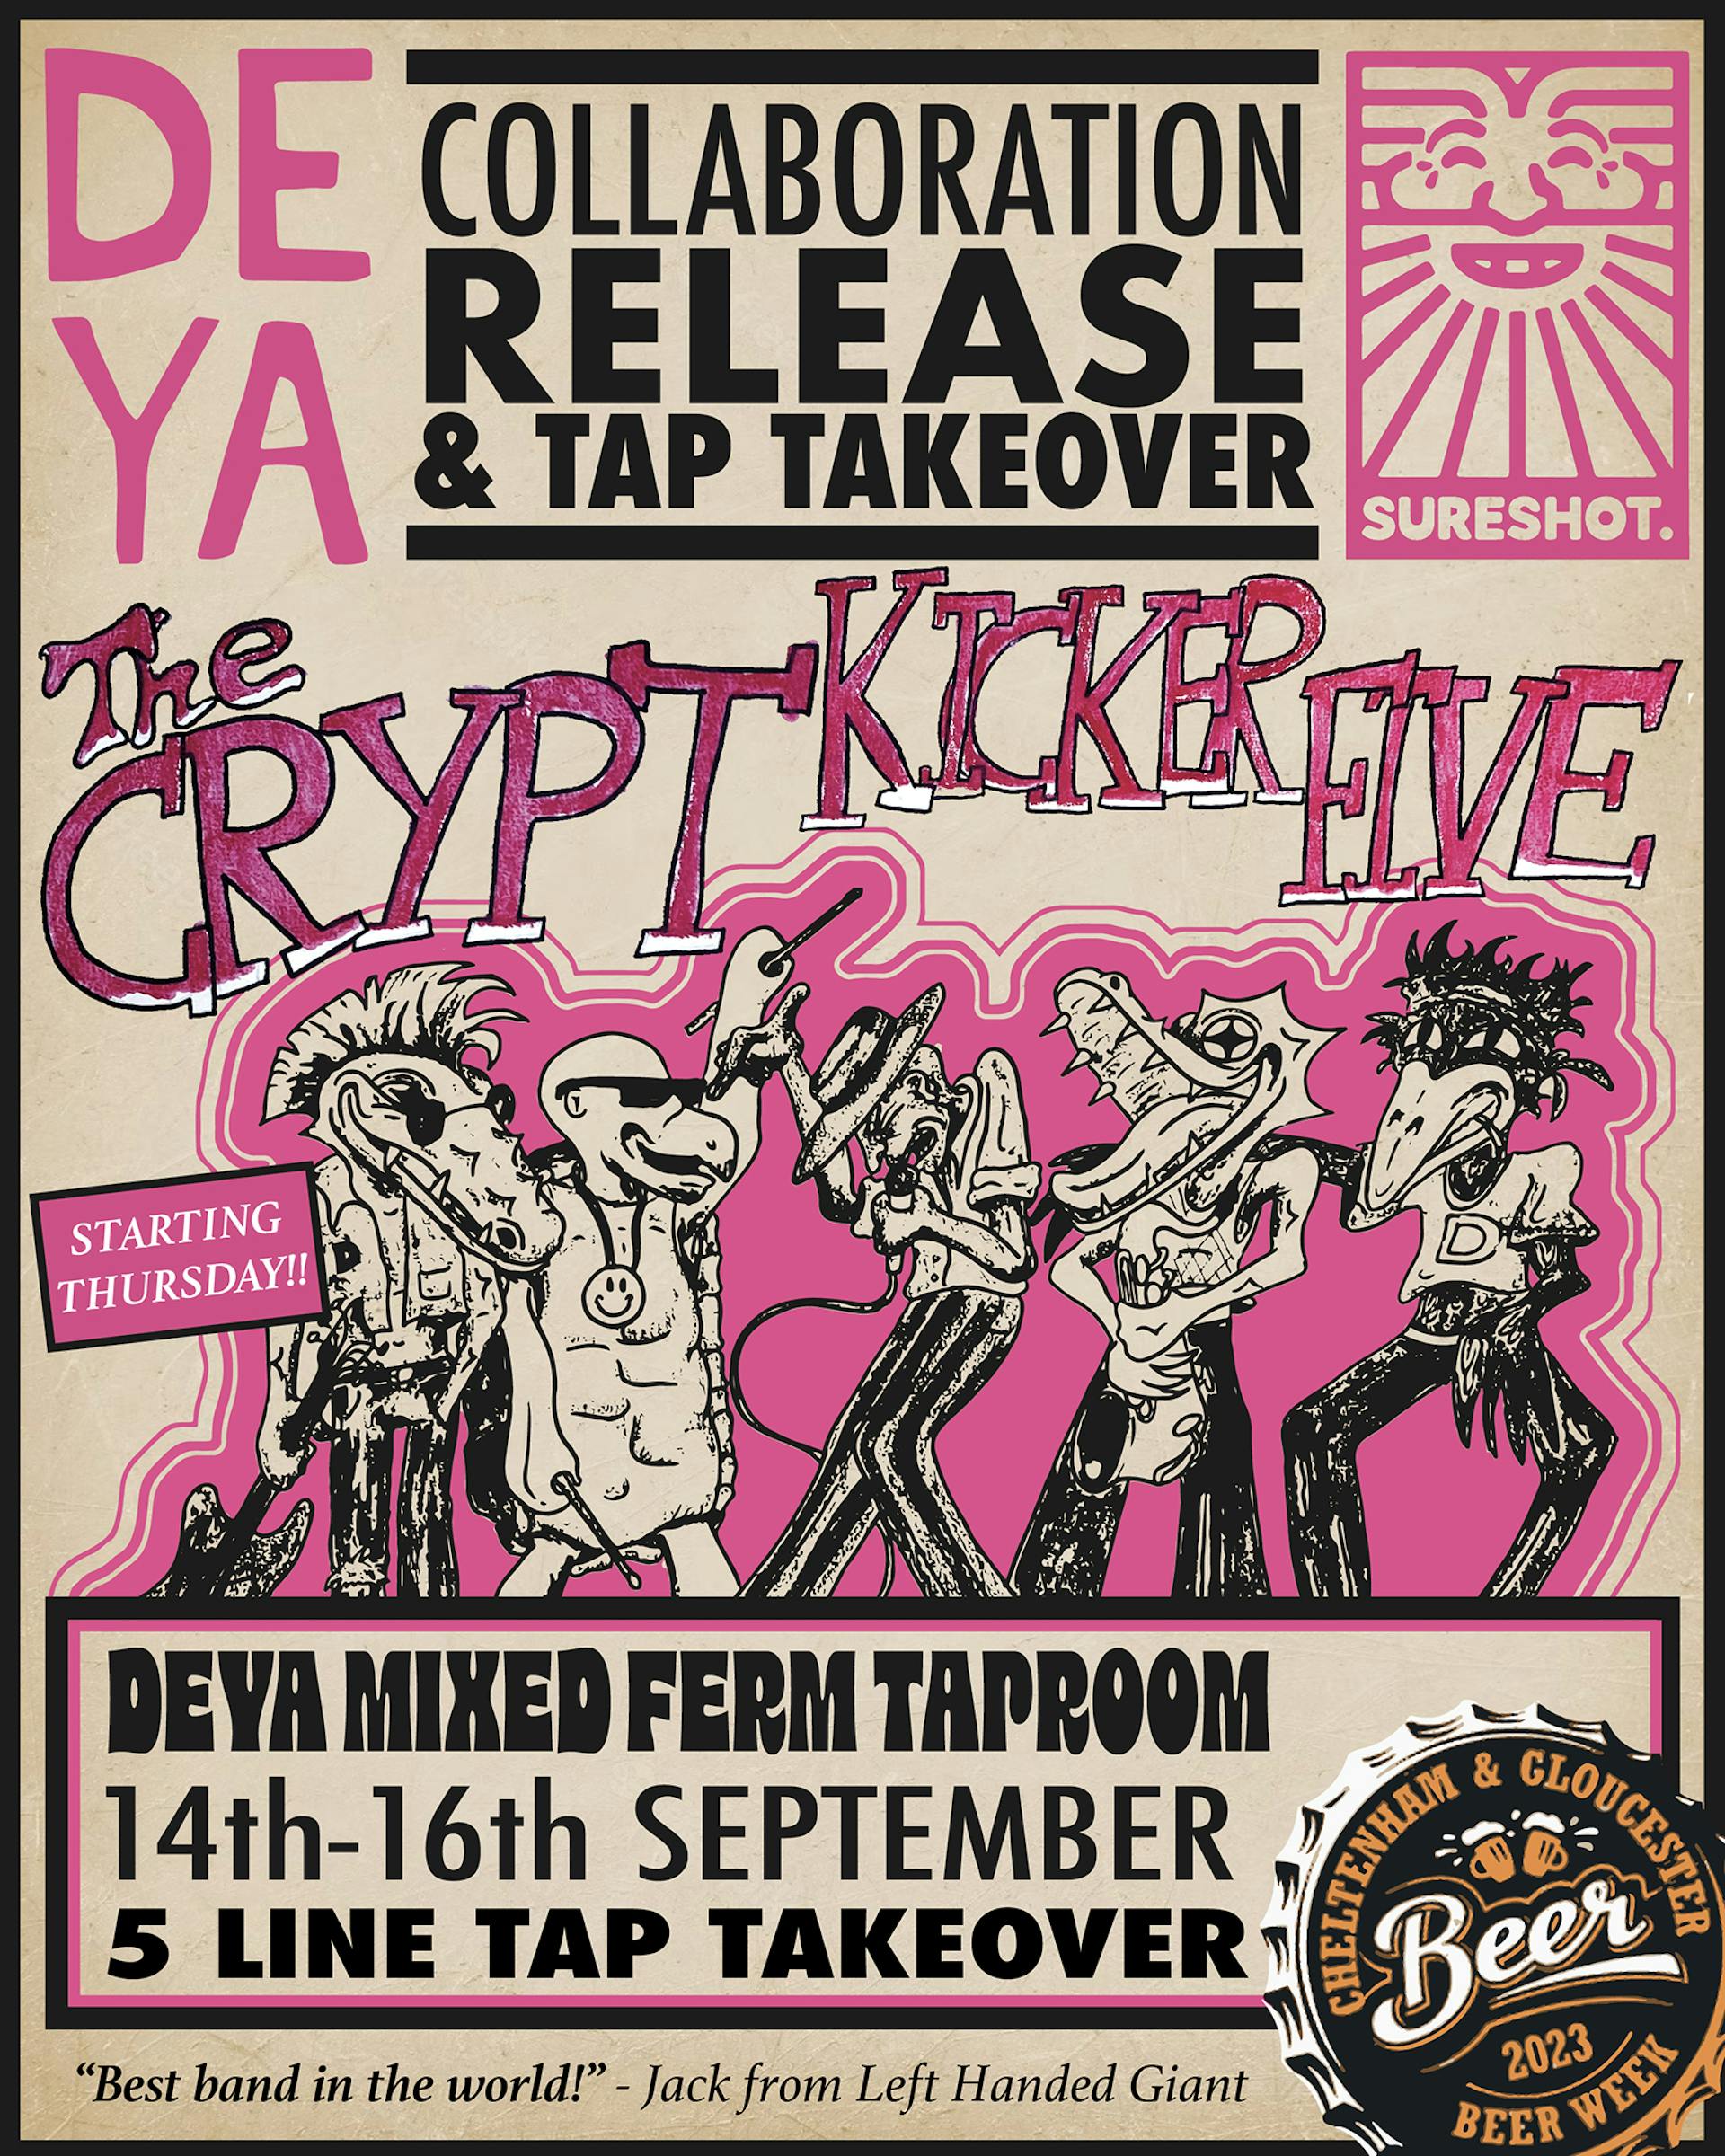 Sureshot Collaboration Release & Tap Takeover POster